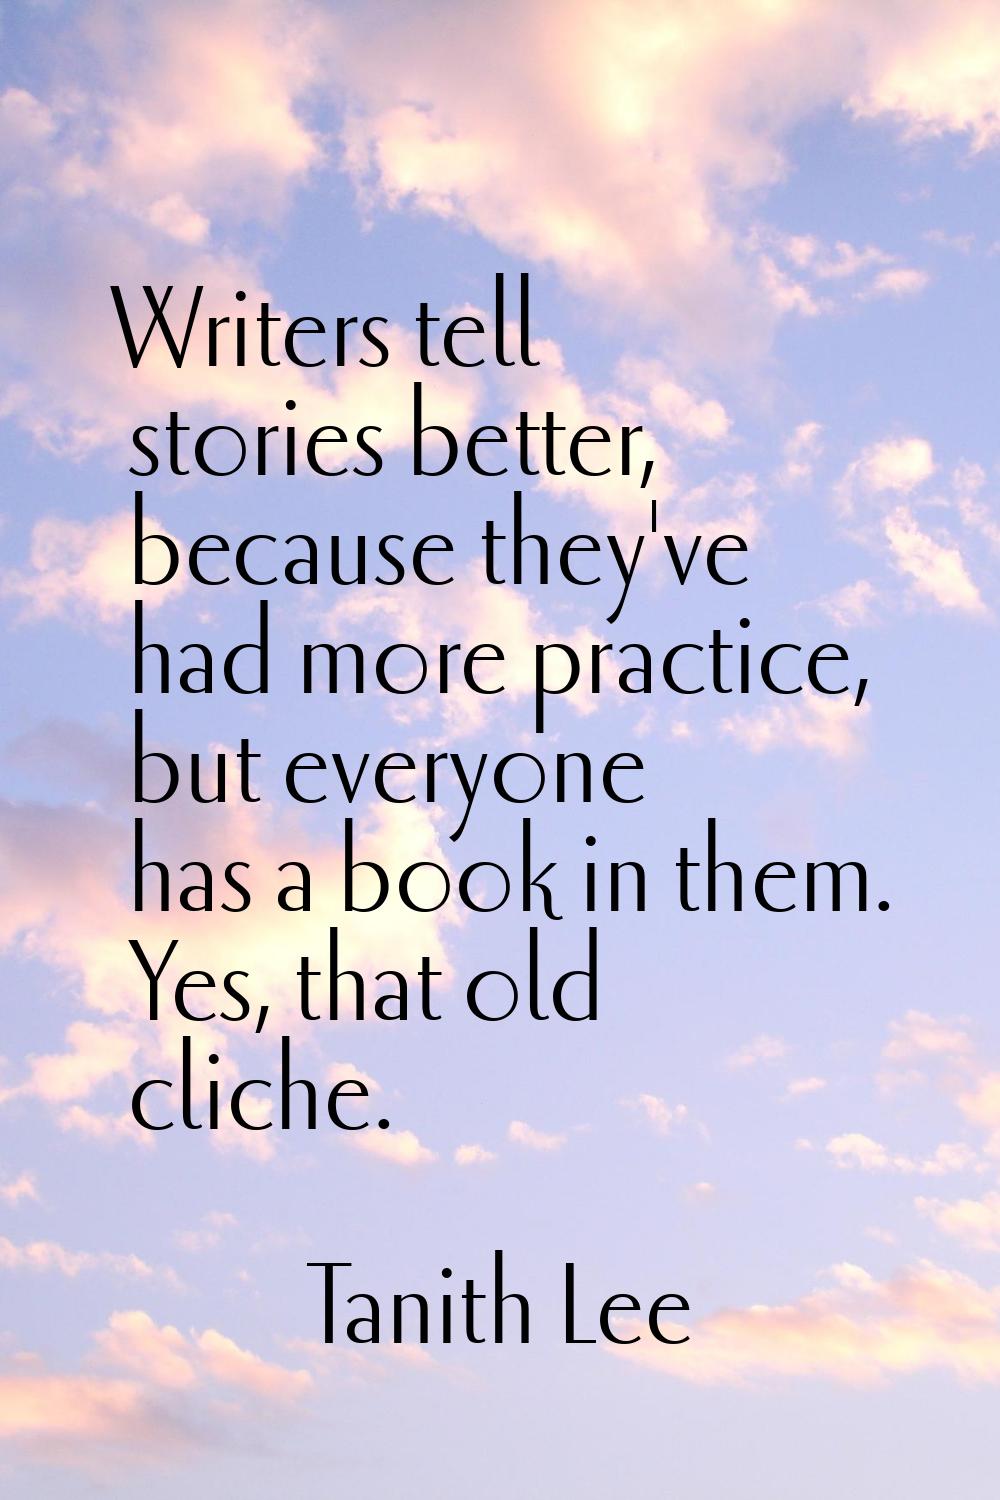 Writers tell stories better, because they've had more practice, but everyone has a book in them. Ye